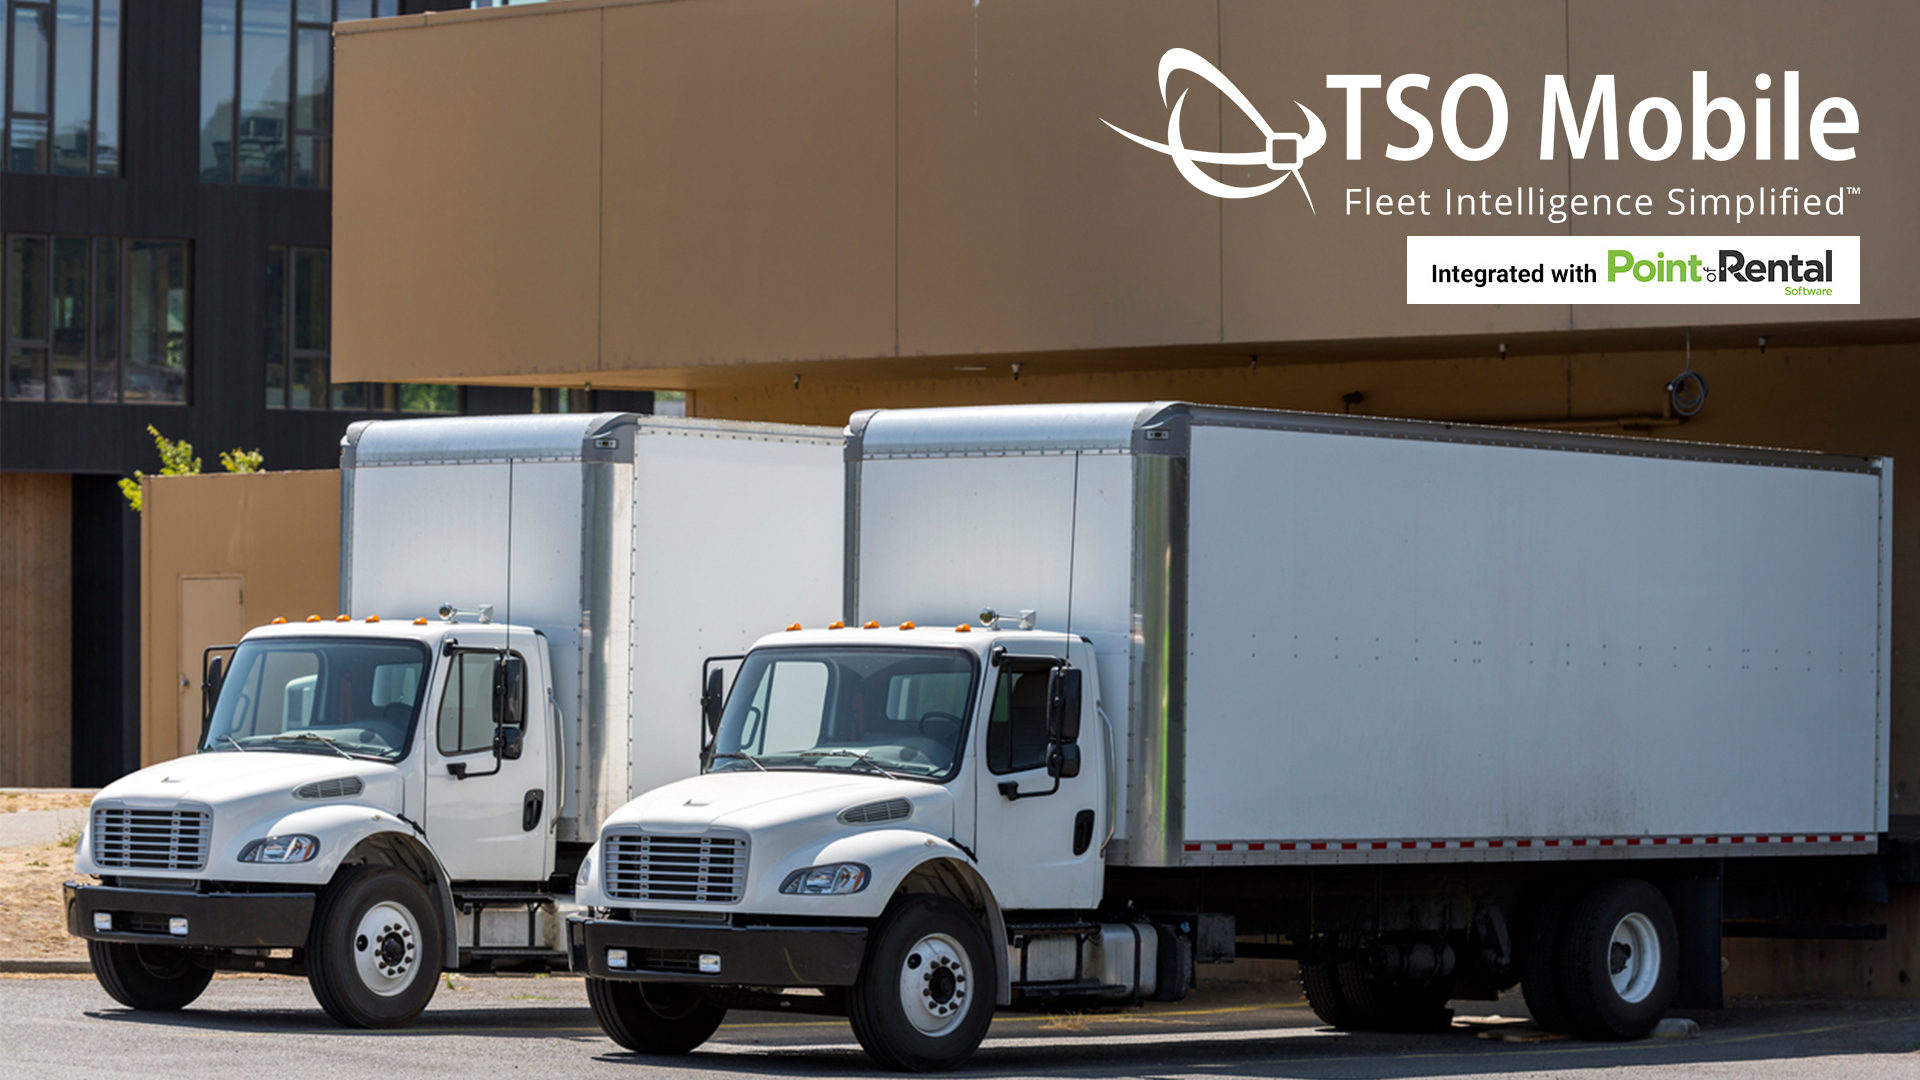 Behind every efficient fleet is realtime tracking like TSO Mobile's. Two trucks are parked in front of a warehouse in this image.